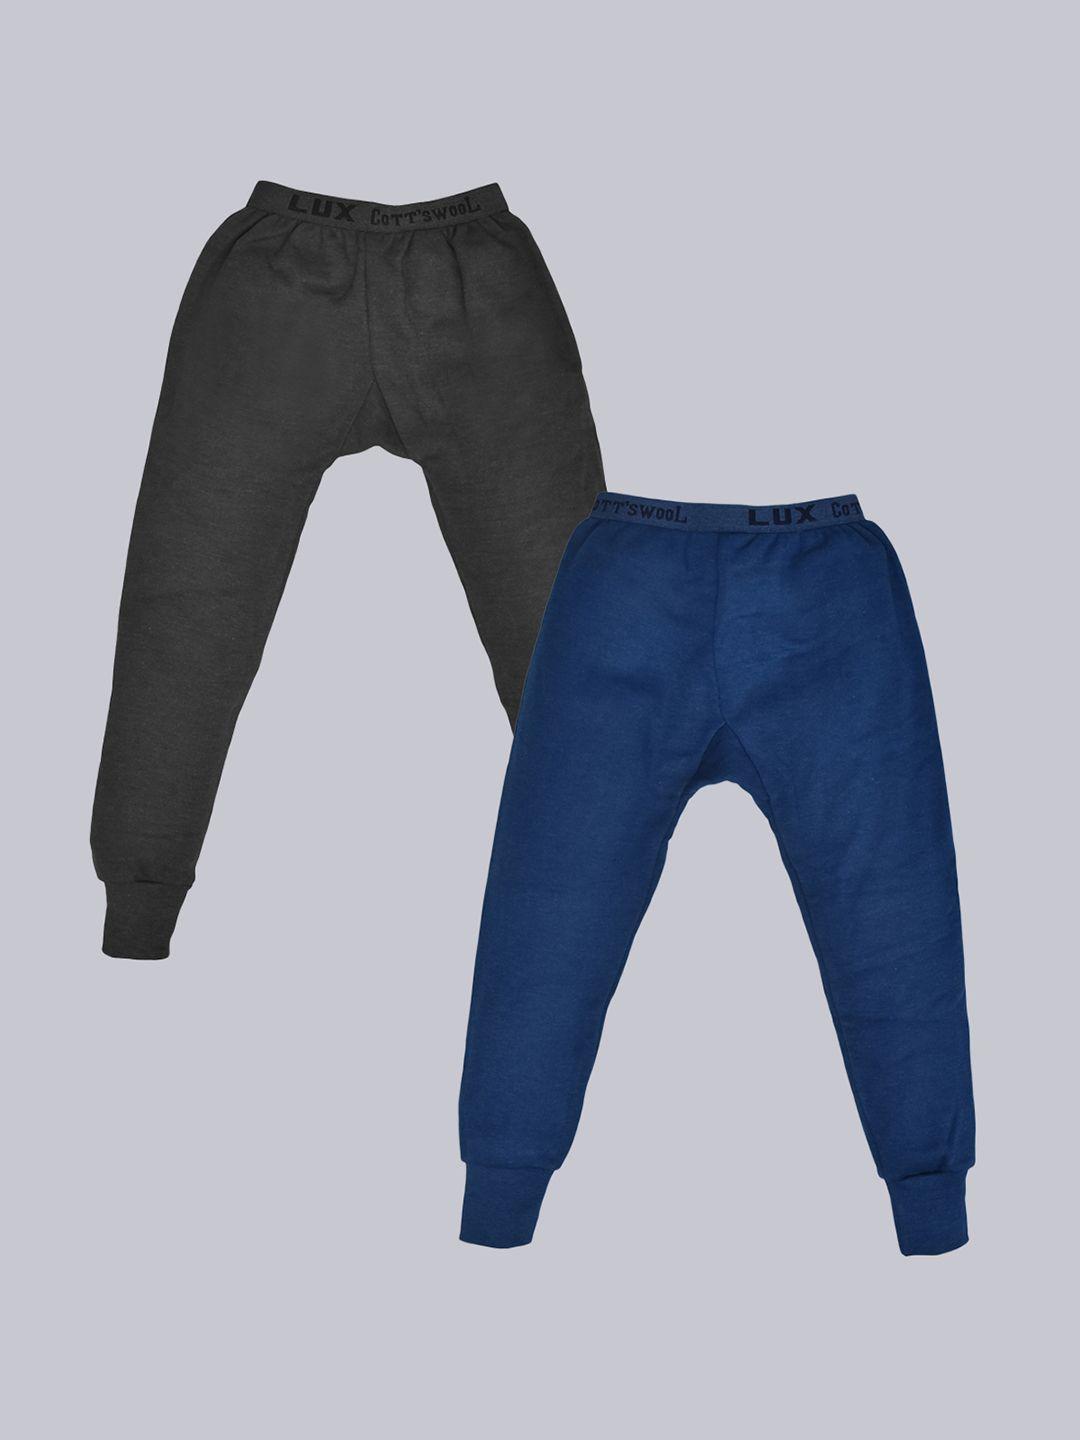 lux cottswool boys black solid cotton thermal bottoms